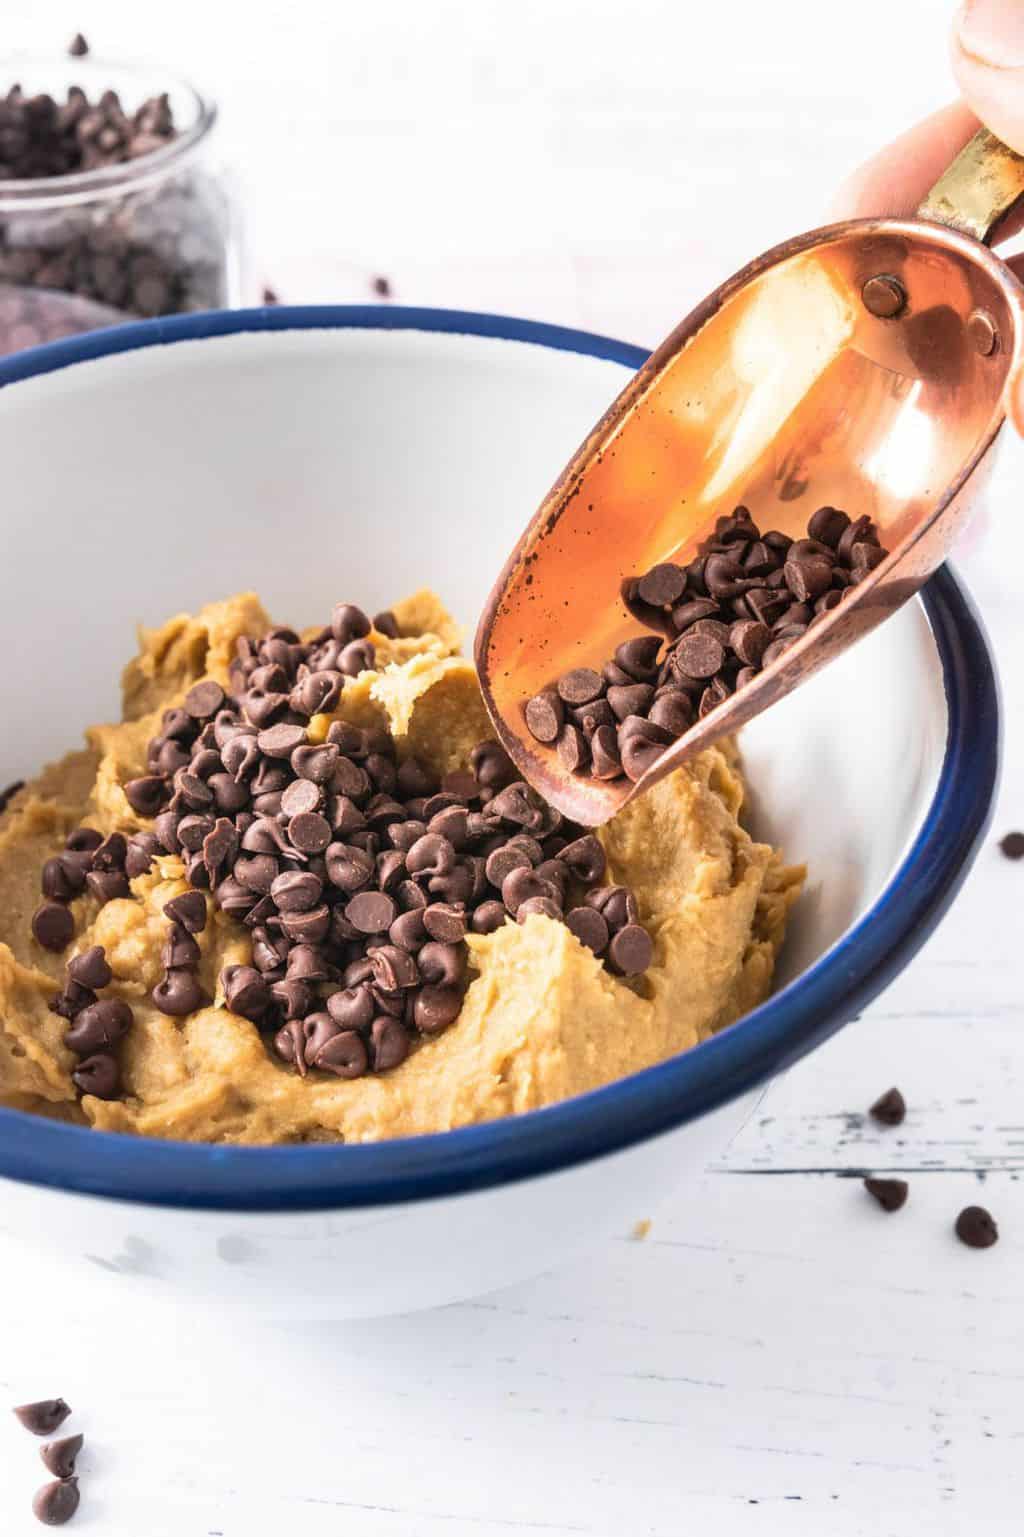 Chickpea Cookie Dough with Chocolate chips by Sugar and Cloth